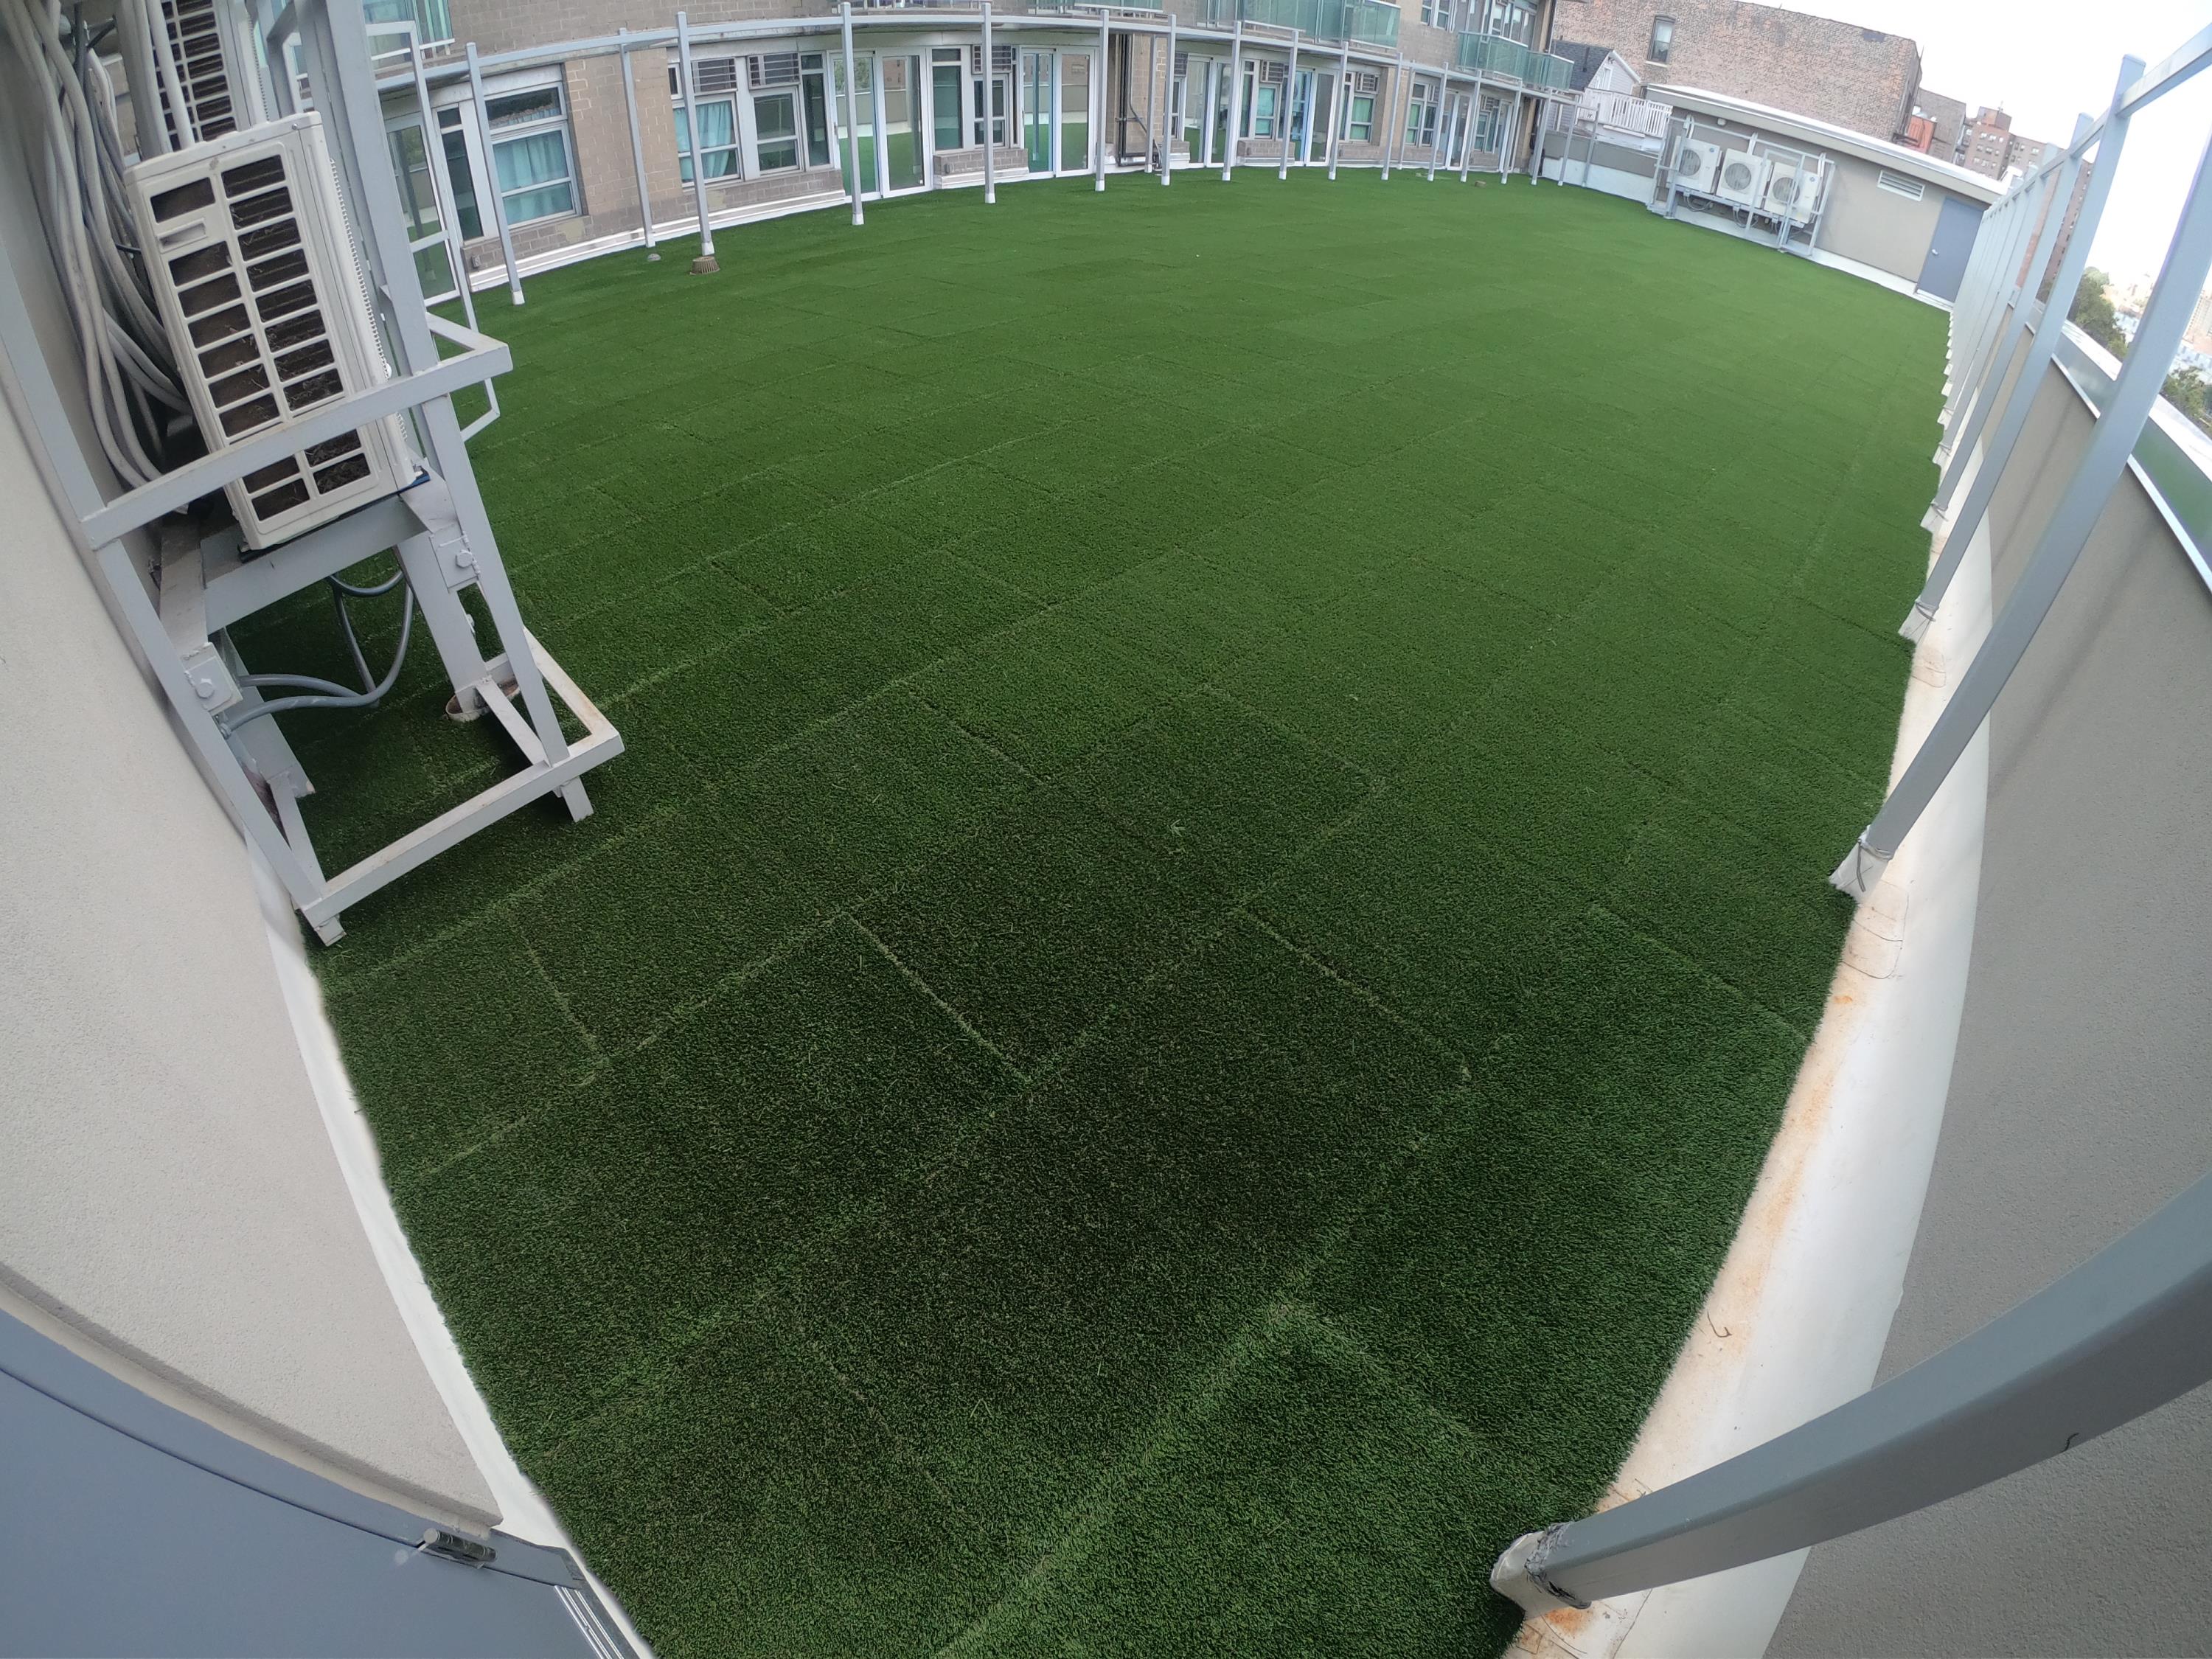 Turf-Top Rubber Pavers for Mixed-Use Building